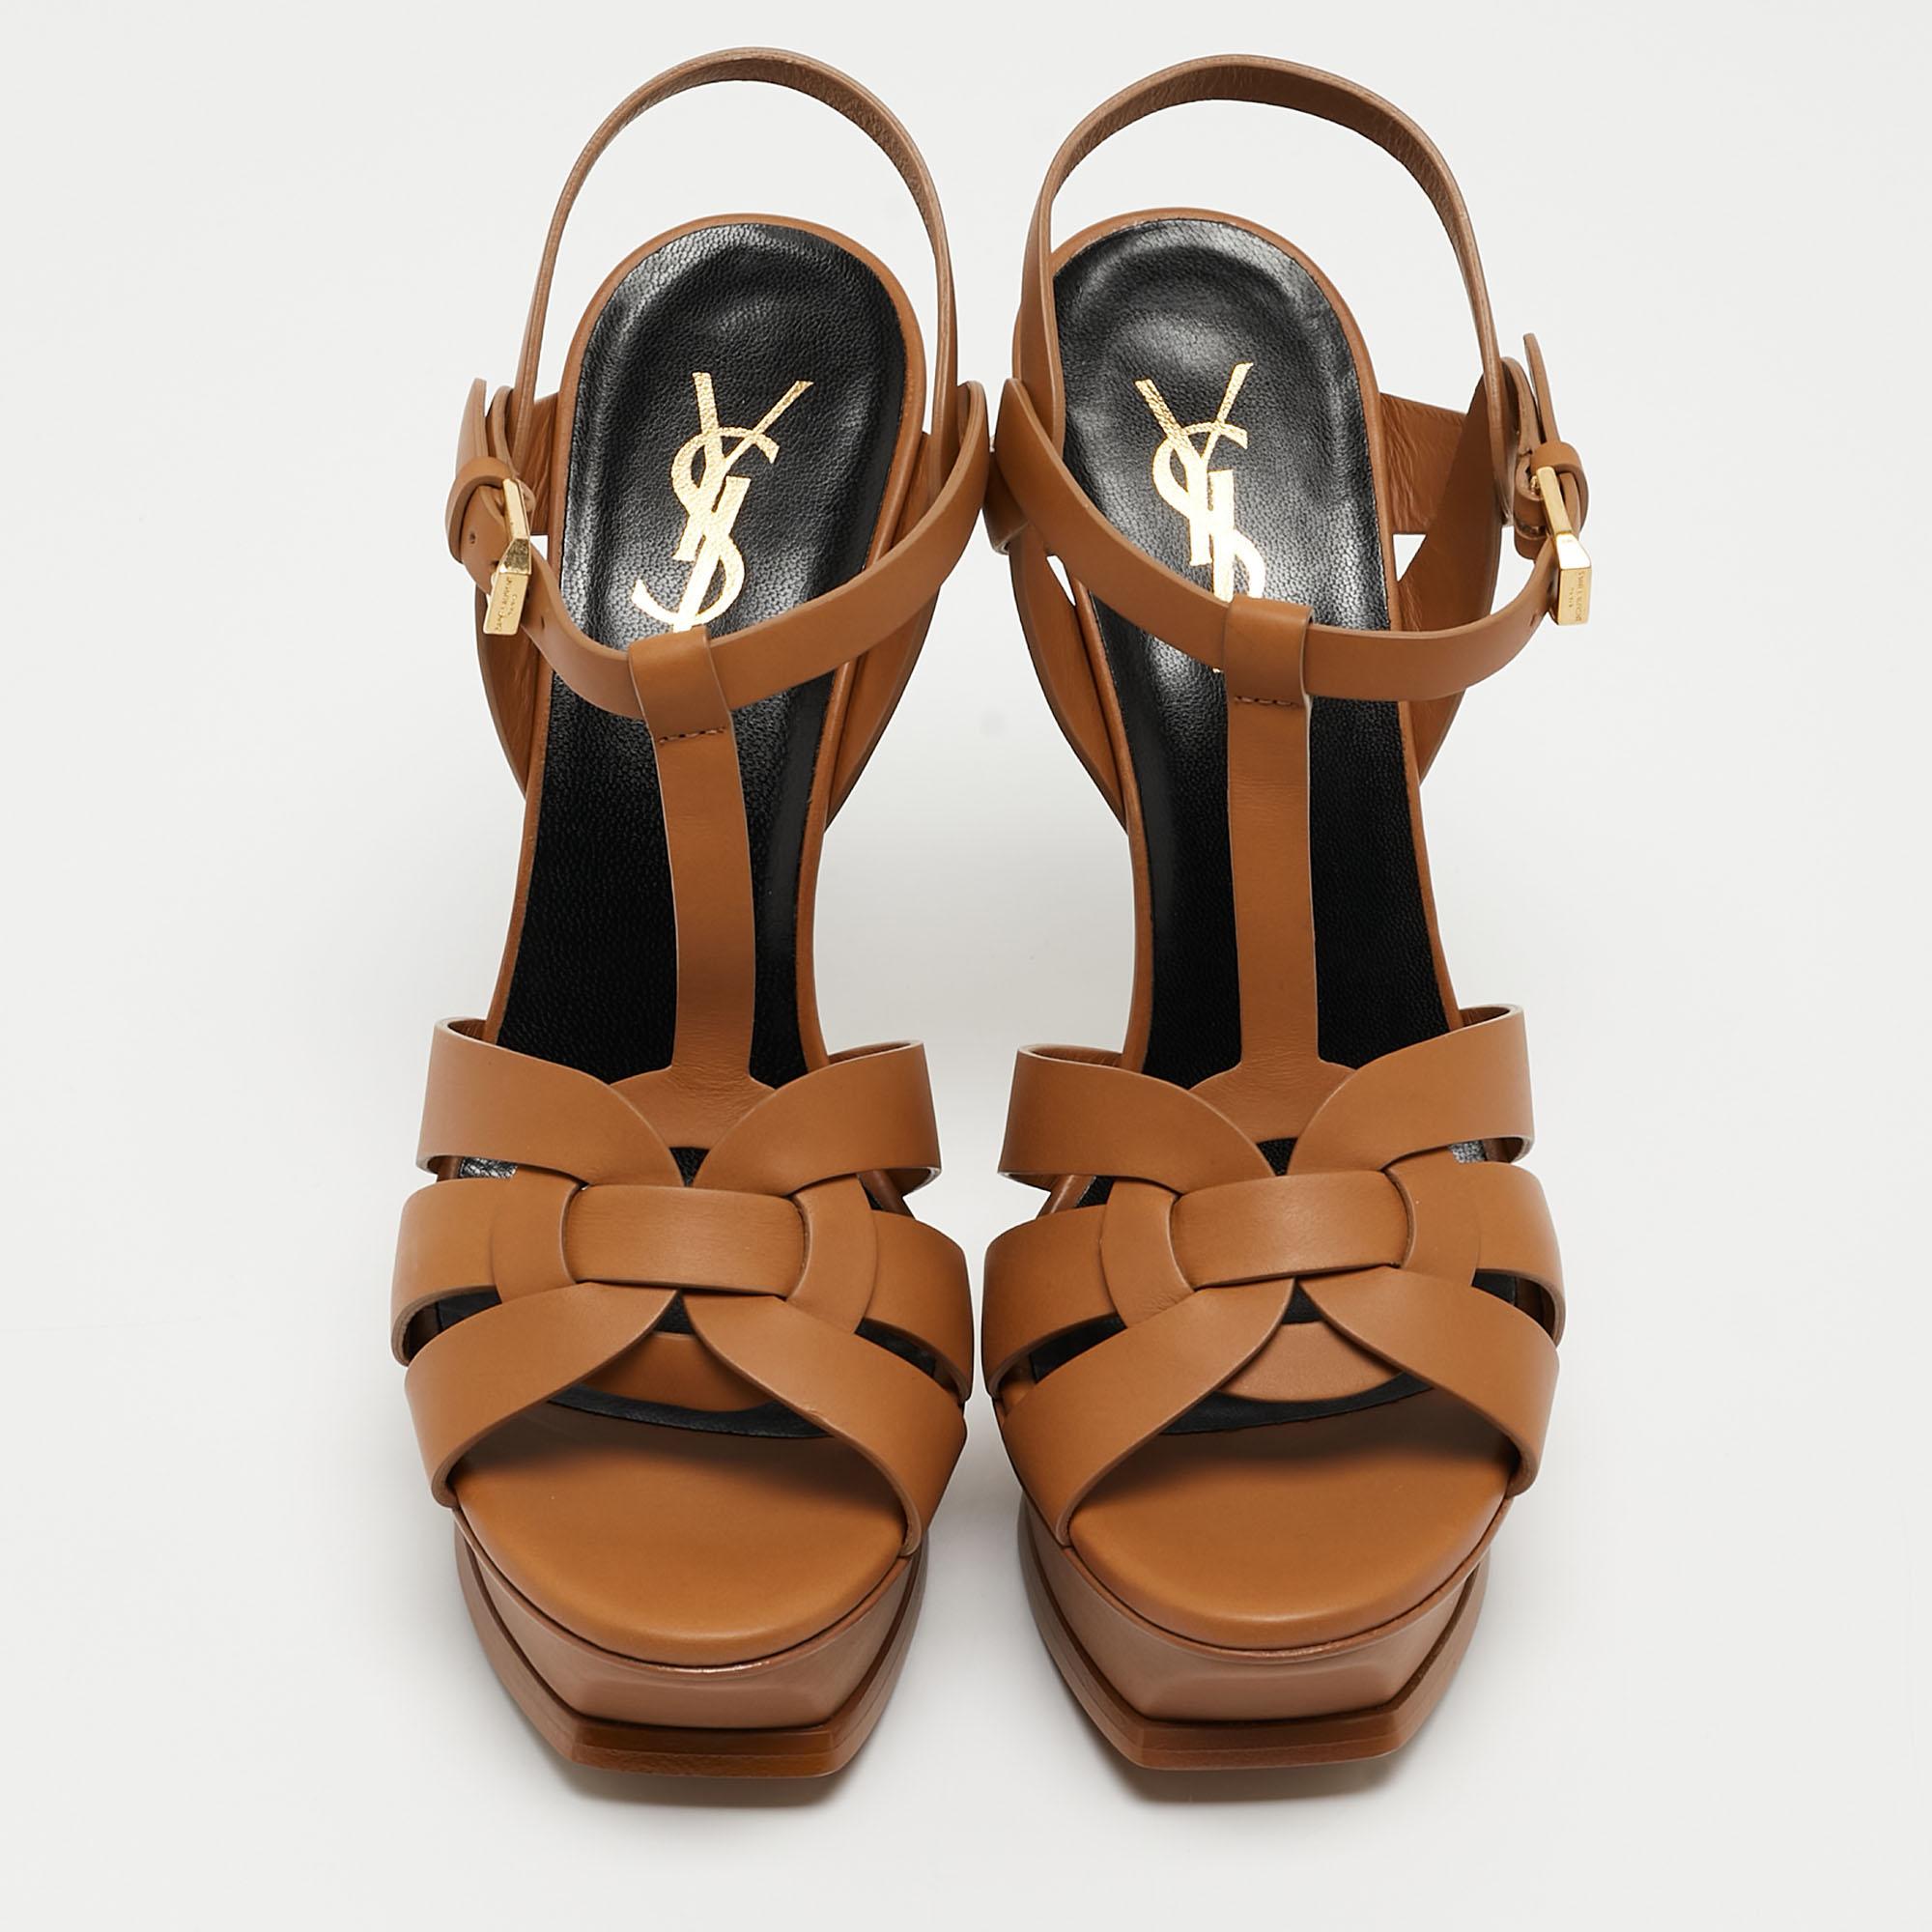 The fashionista in you will fall in love with these Saint Laurent Tribute sandals. They are made from brown leather with intertwined straps on the vamps and ankle buckle closure. The gold-tone hardware, 13cm heels, and platform give this pair a fine